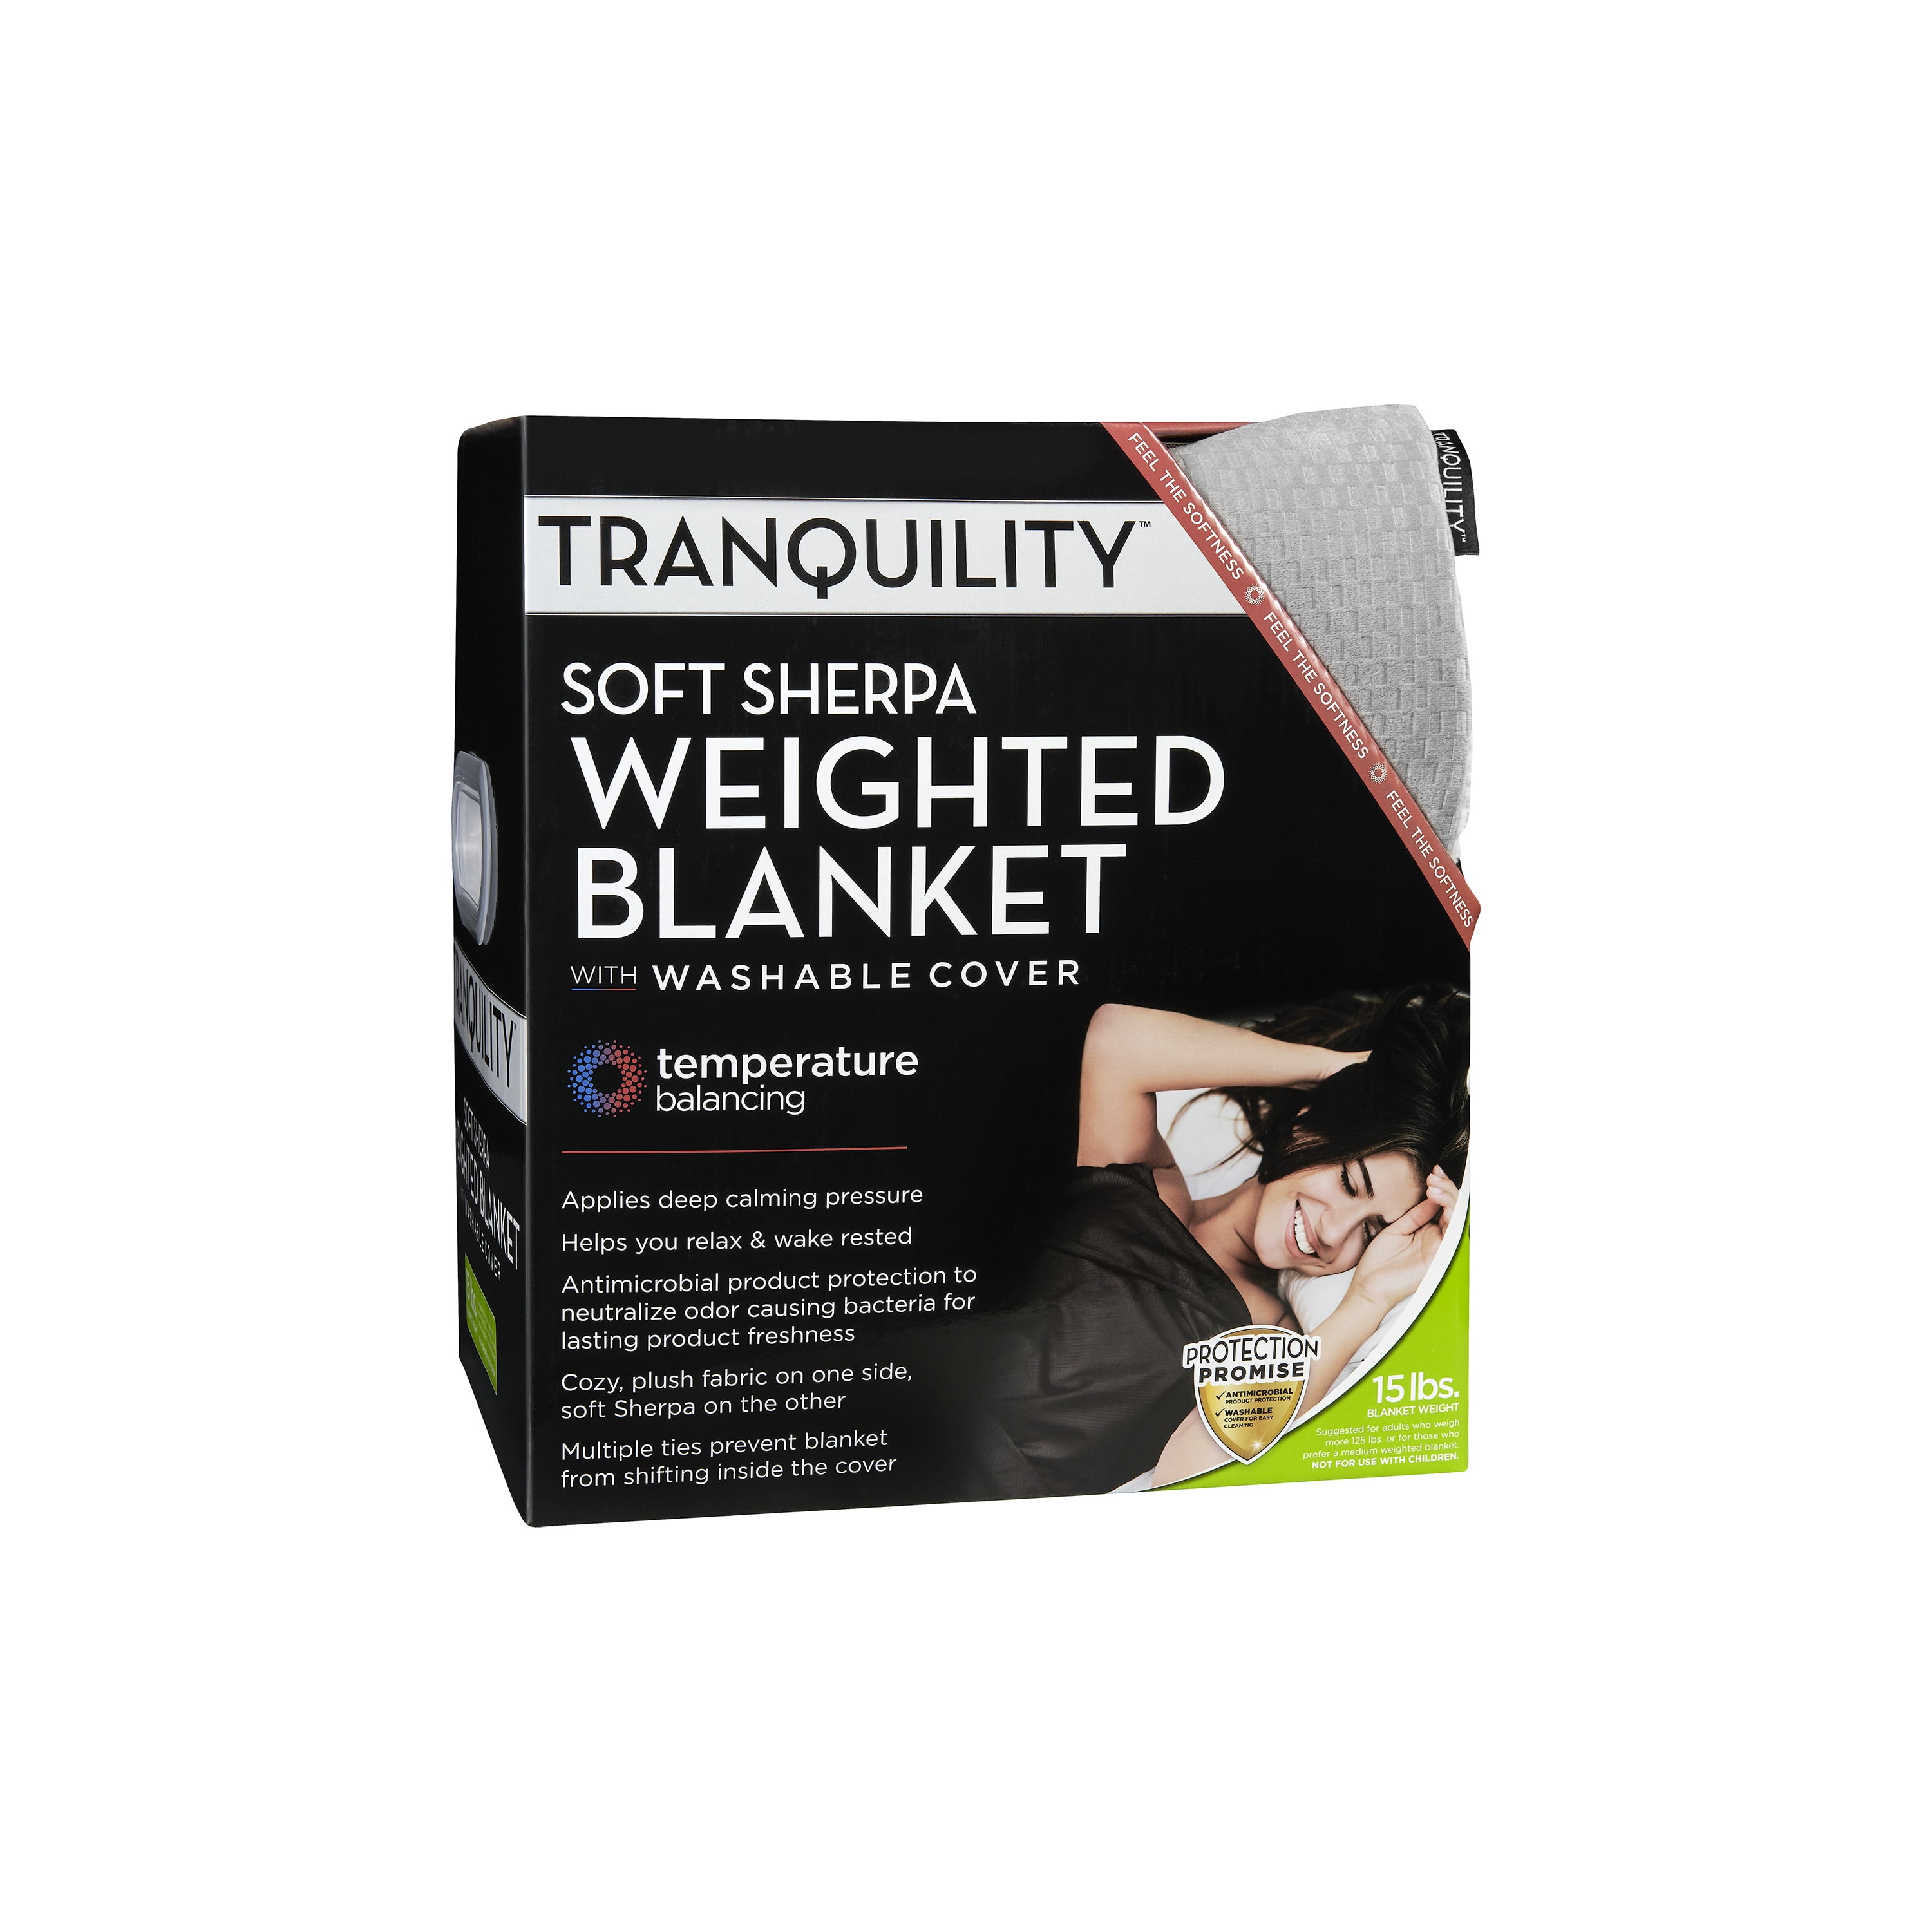 Tranquility Sherpa Weighted Blanket 15lb - Walmart.com